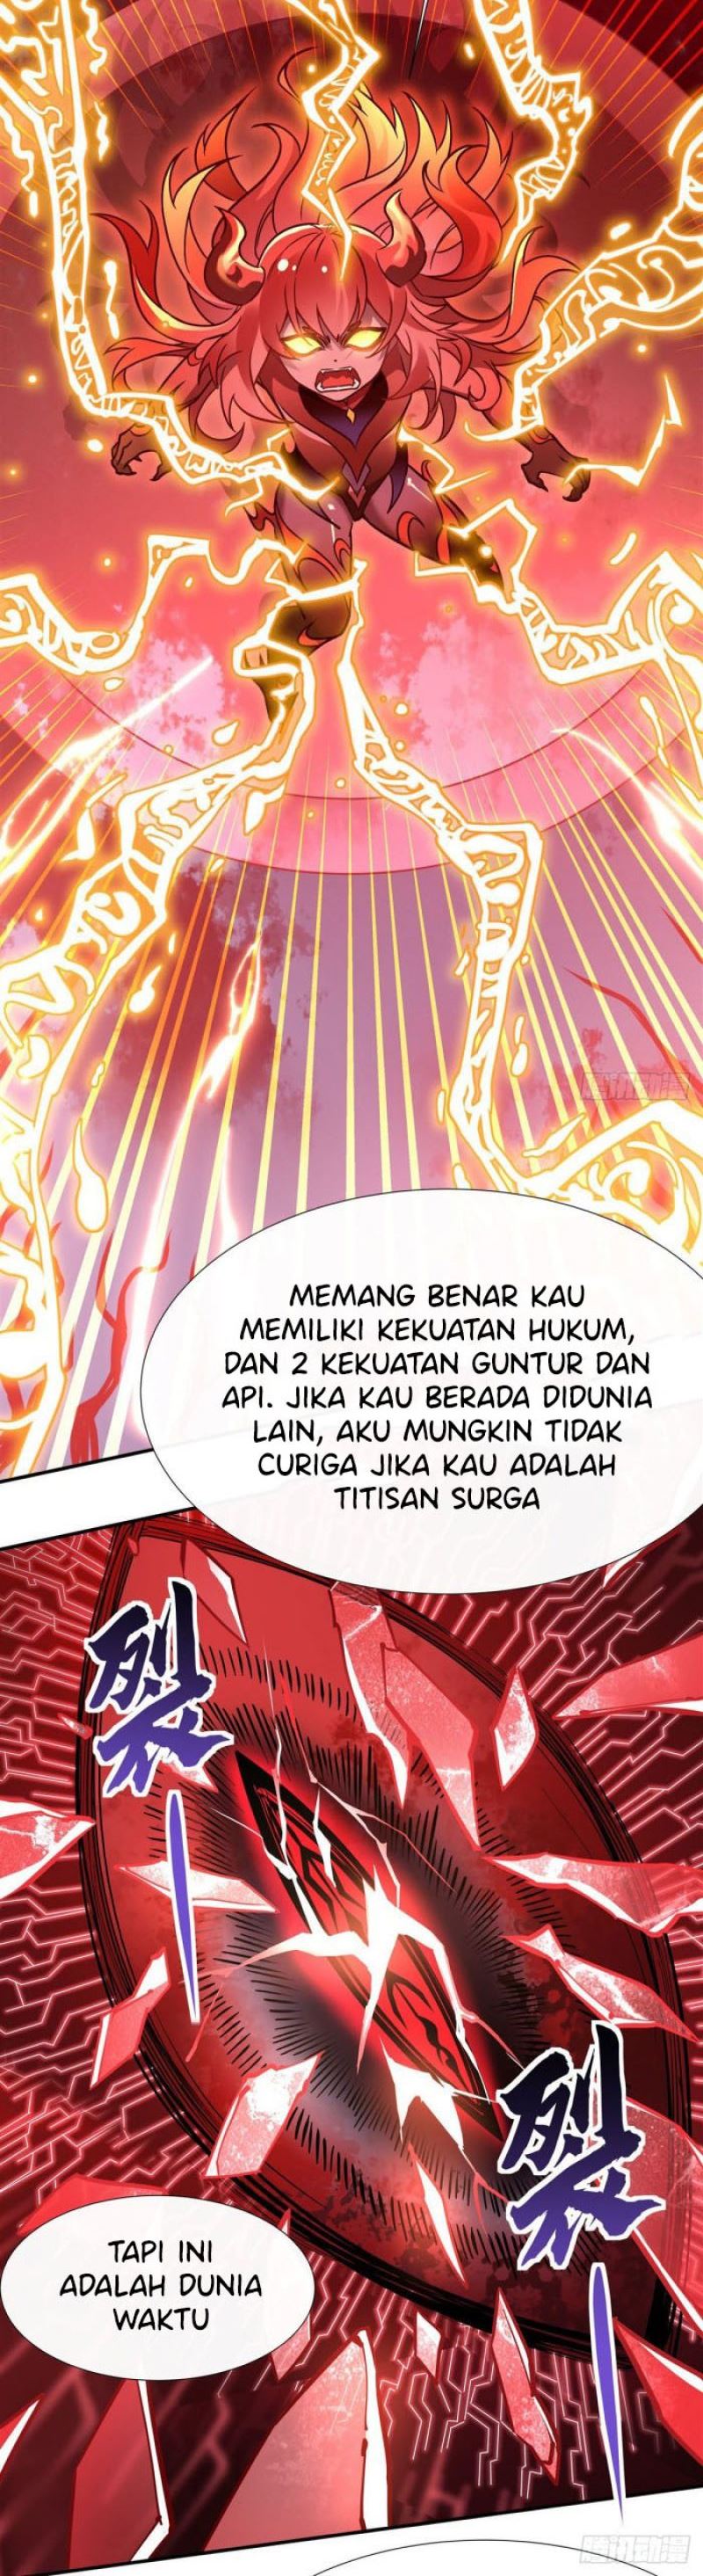 Dilarang COPAS - situs resmi www.mangacanblog.com - Komik my female apprentices are all big shots from the future 115 - chapter 115 116 Indonesia my female apprentices are all big shots from the future 115 - chapter 115 Terbaru 20|Baca Manga Komik Indonesia|Mangacan